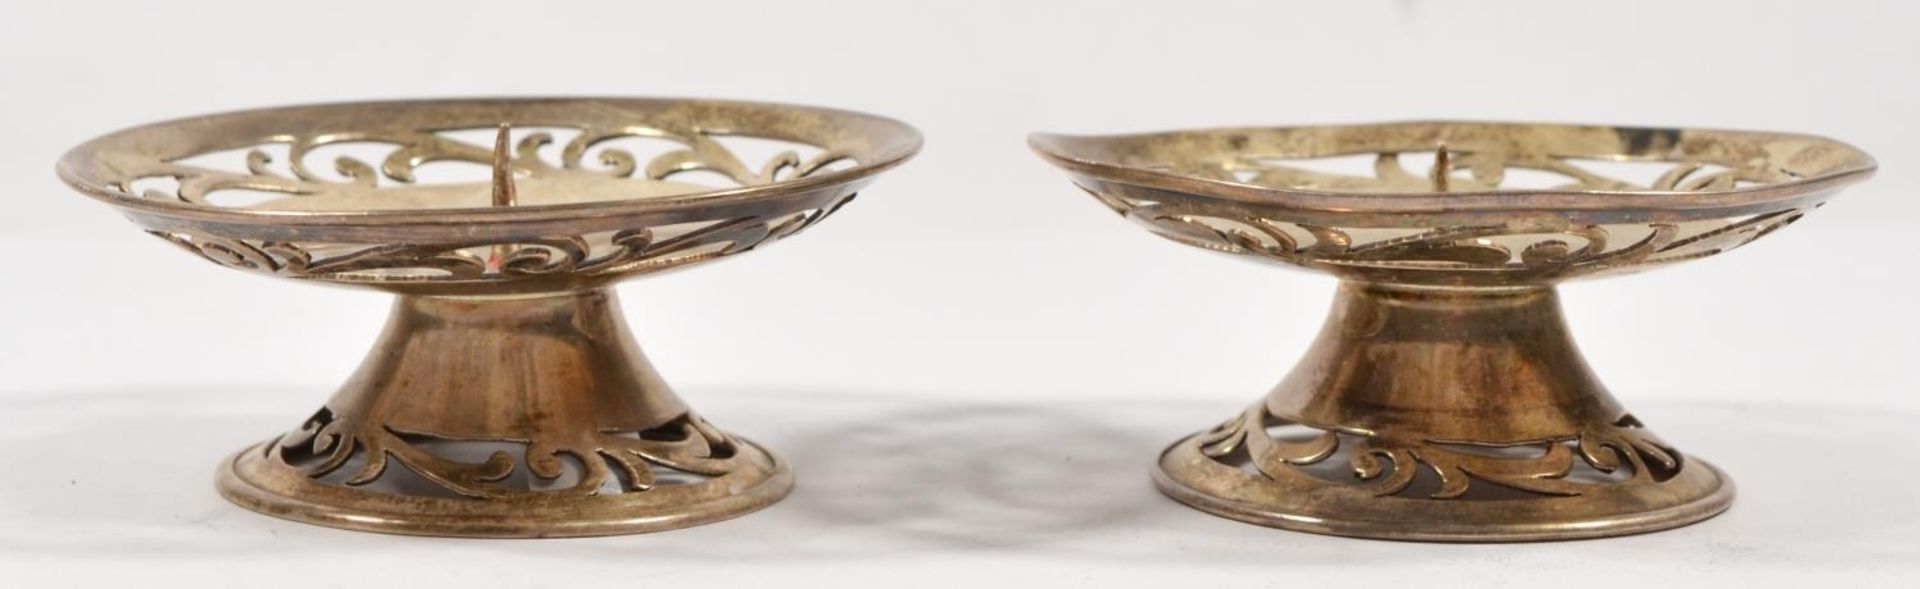 A pair of silver squat desk candlesticks, stamped SILVER, with pierced decoration, diameter 8cm, - Image 2 of 3